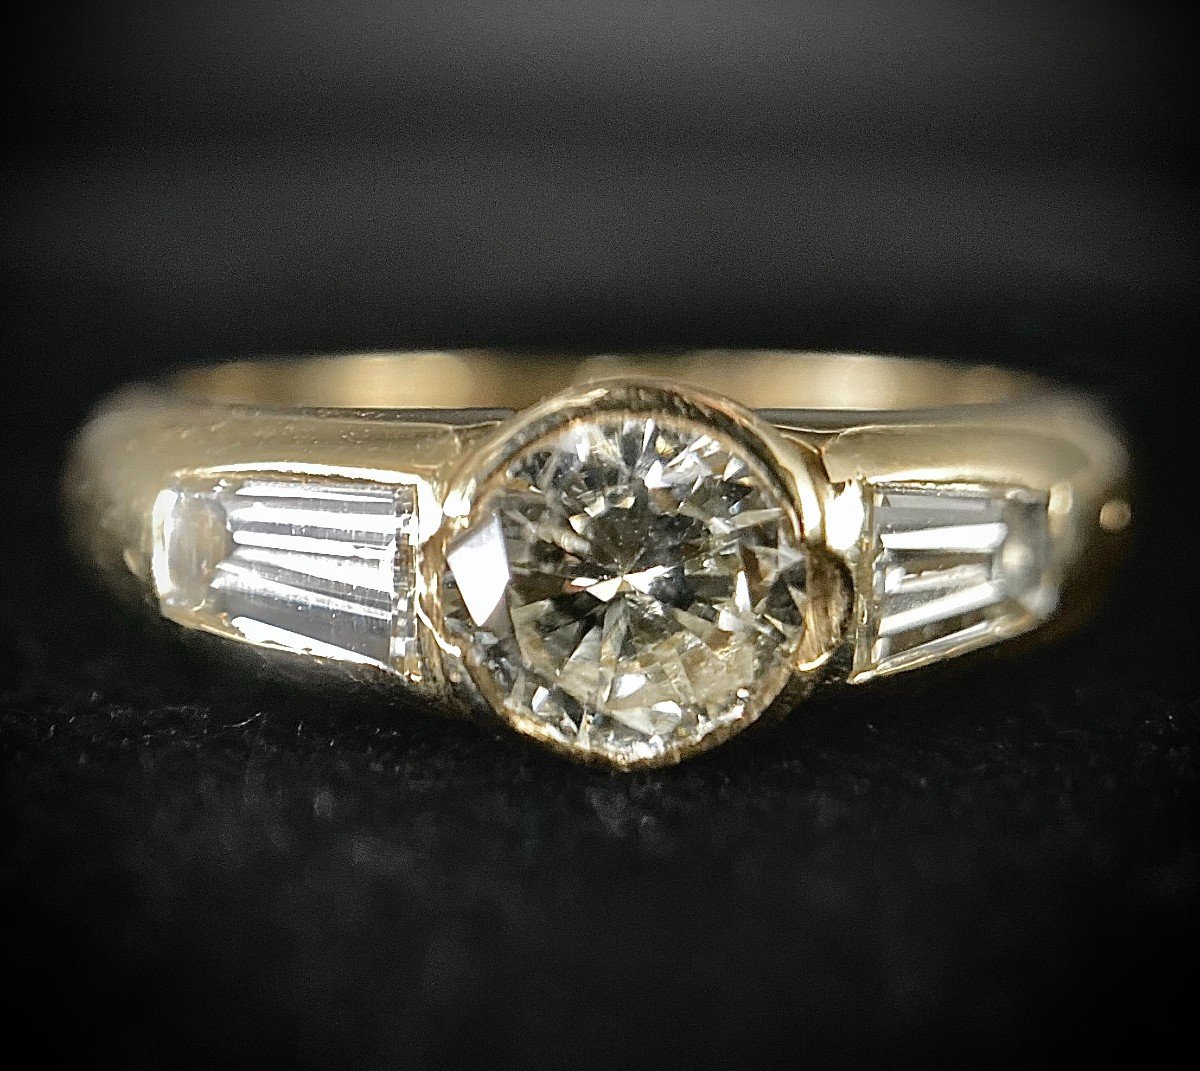 18k Yellow Gold Ring With 1 Diamond Of 0.55 Carat And 2 Baguettes 0.50 Carat-photo-3